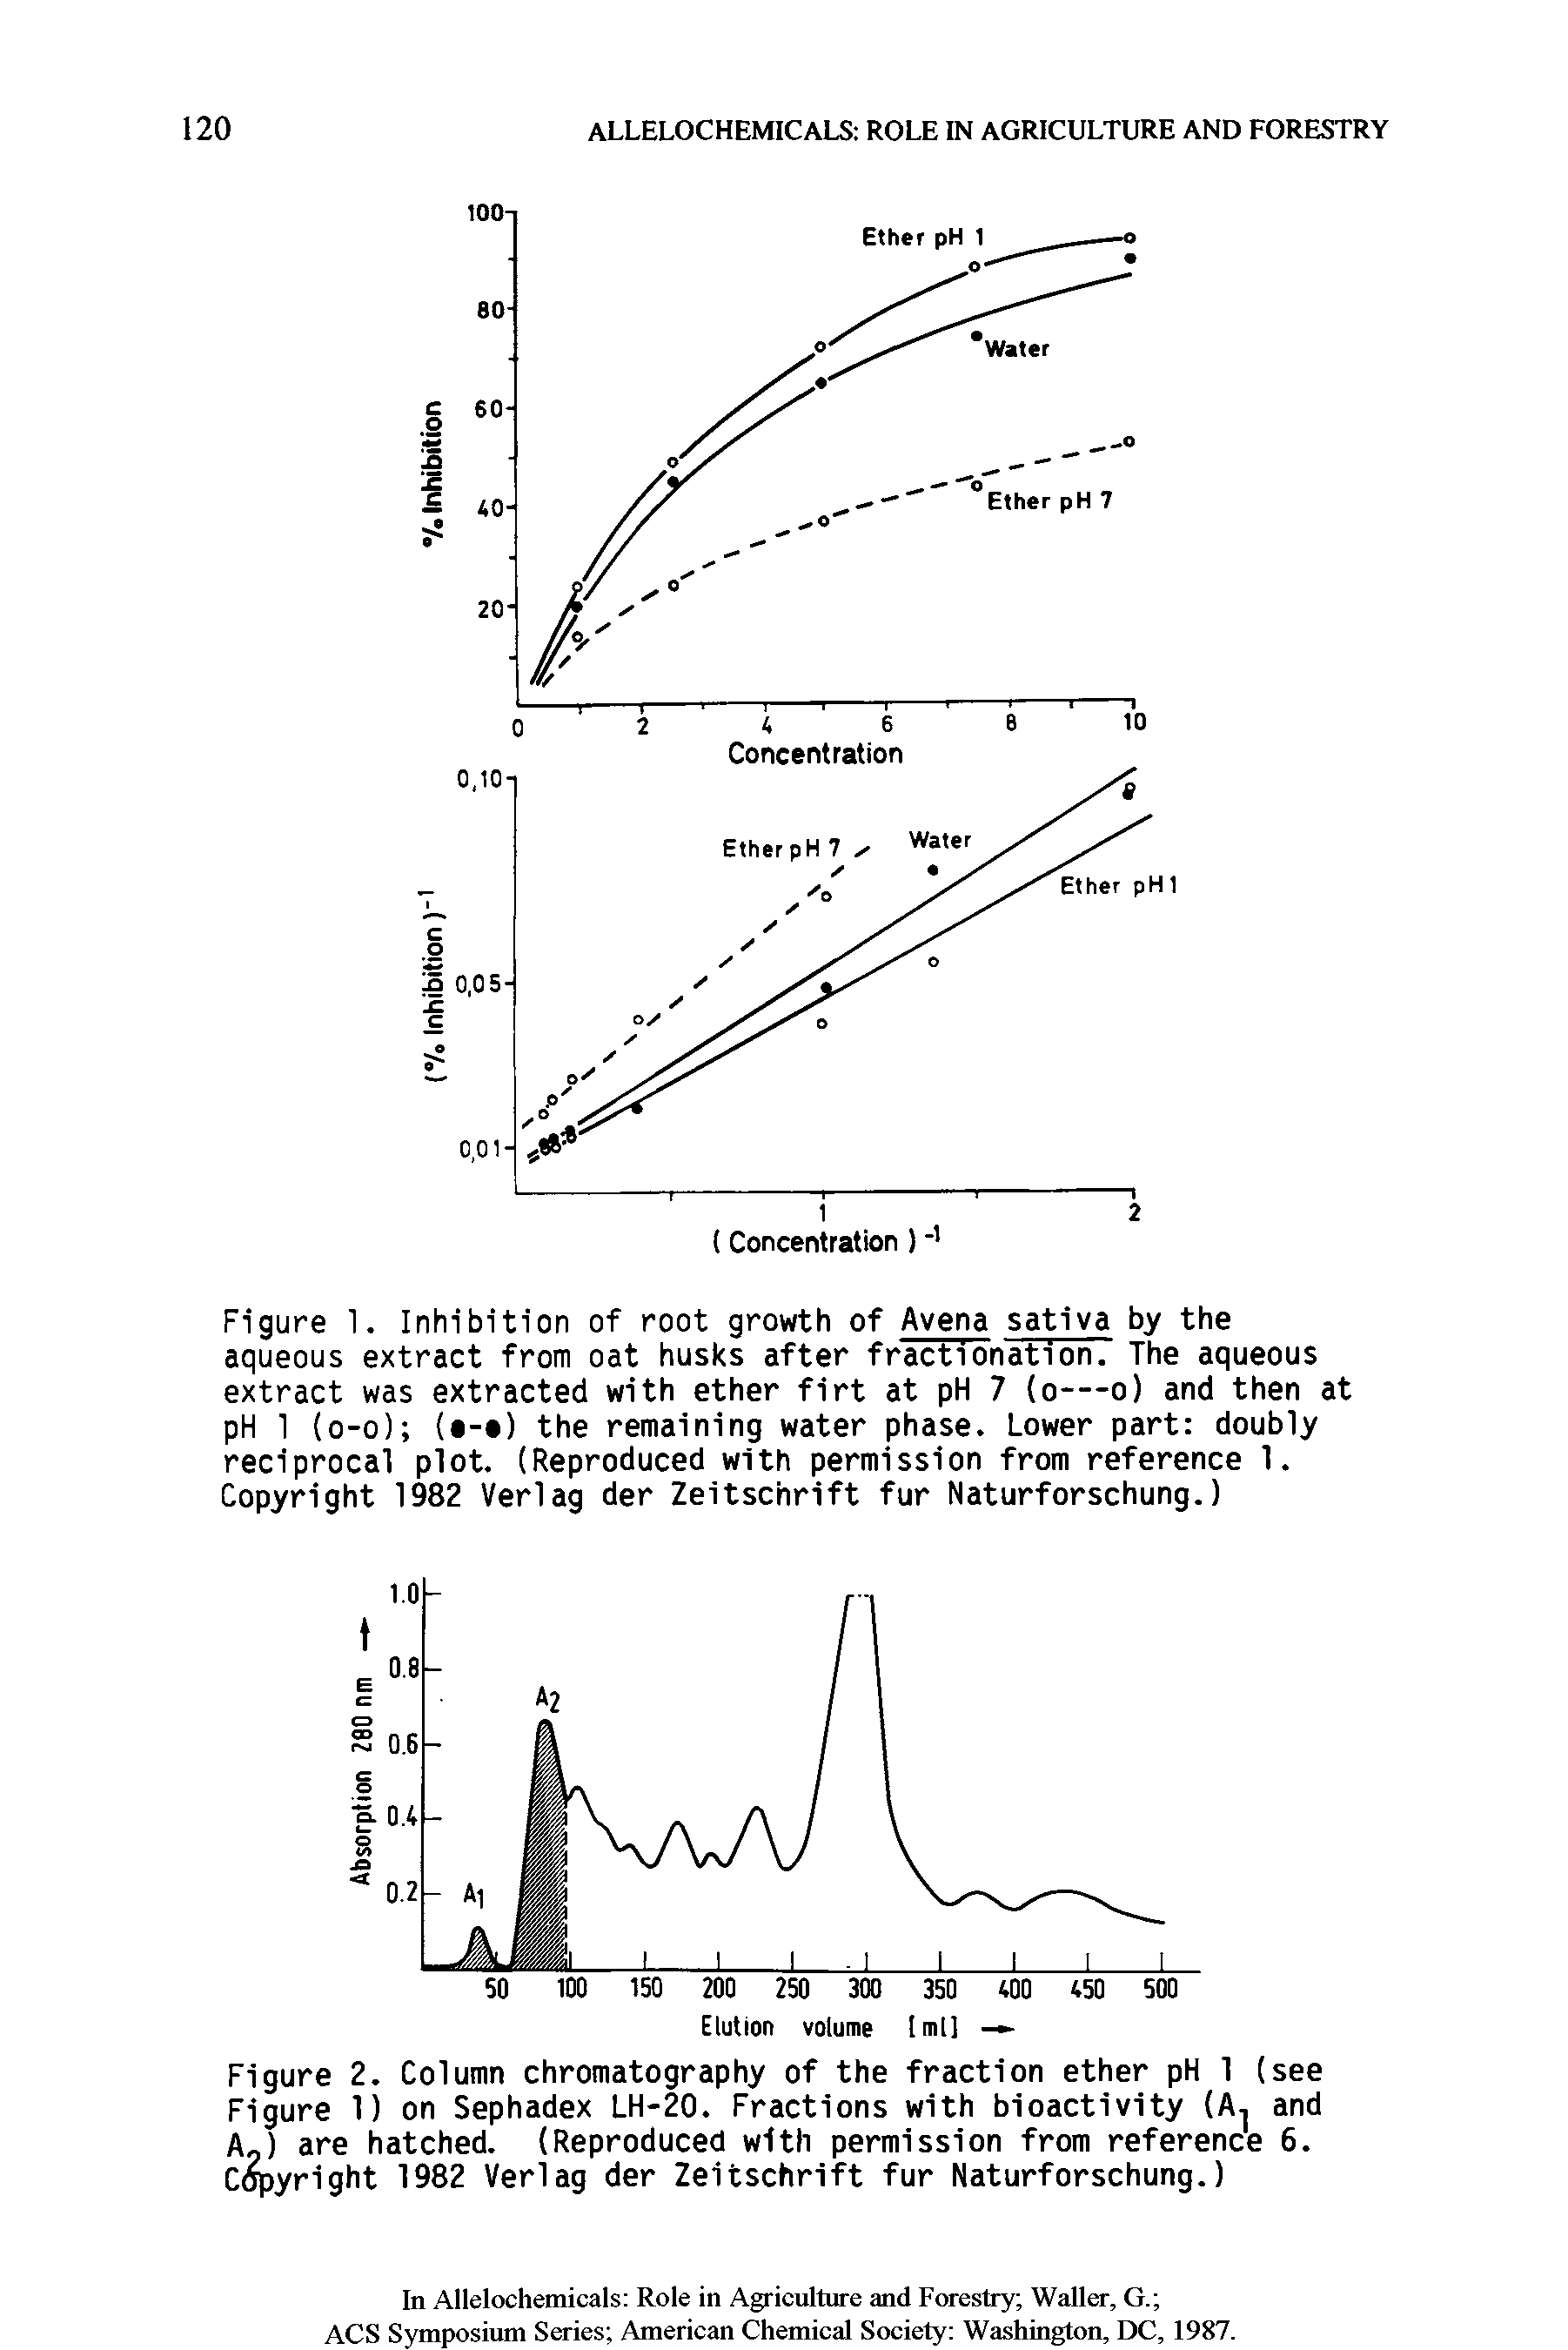 Figure 1. Inhibition of root growth of Avena sativa by the aqueous extract from oat husks after fractionation. The aqueous extract was extracted with ether firt at pH 7 (o—o) and then at pH 1 (o-o) ( - ) the remaining water phase. Lower part doubly reciprocal plot. (Reproduced with permission from reference 1. Copyright 1982 Verlag der Zeitschrift fur Naturforschung.)...